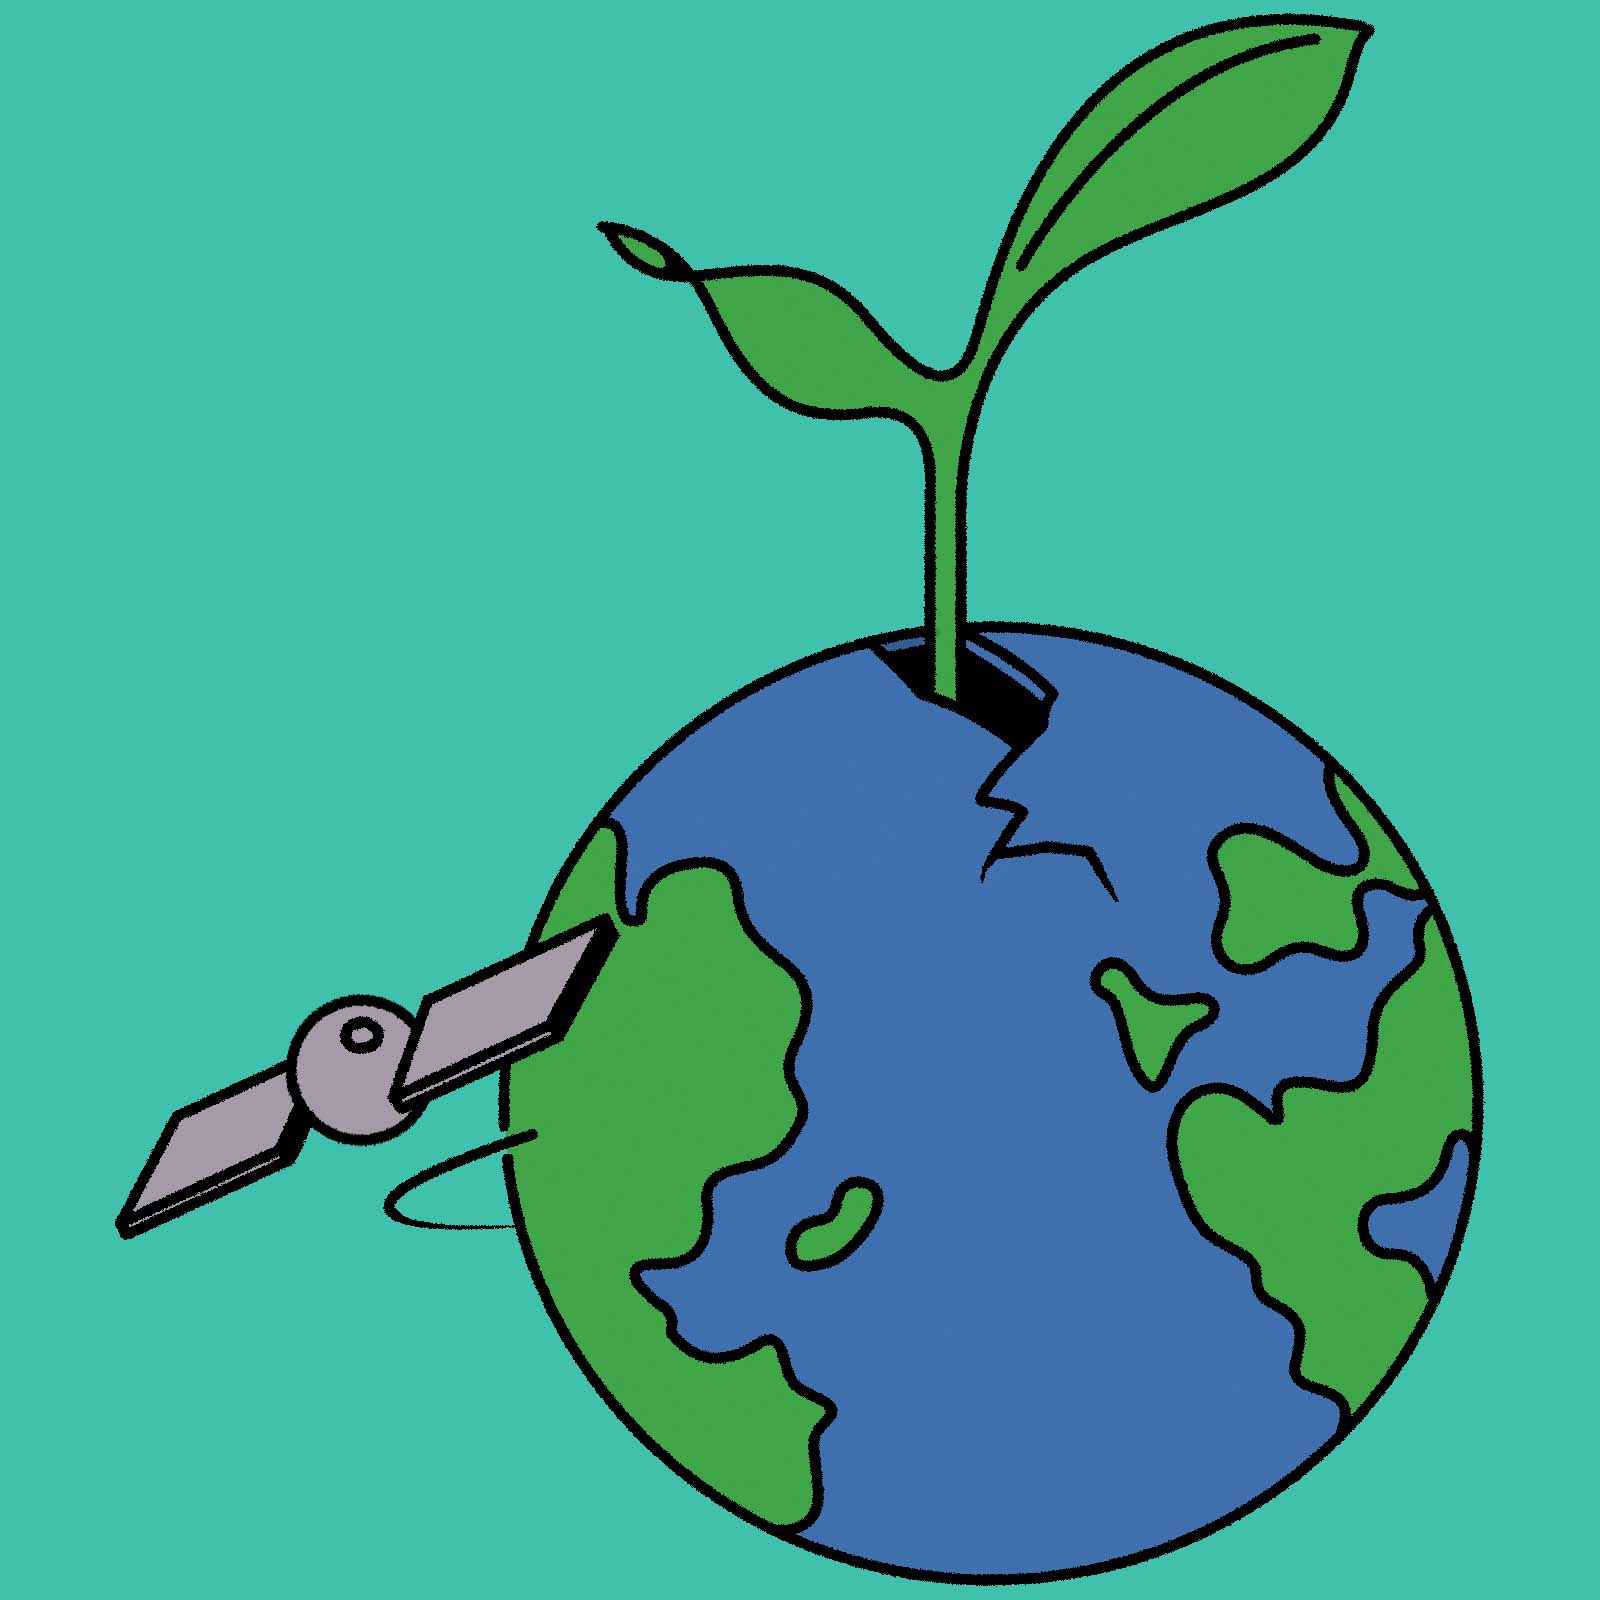 How to... make your website more eco-friendly